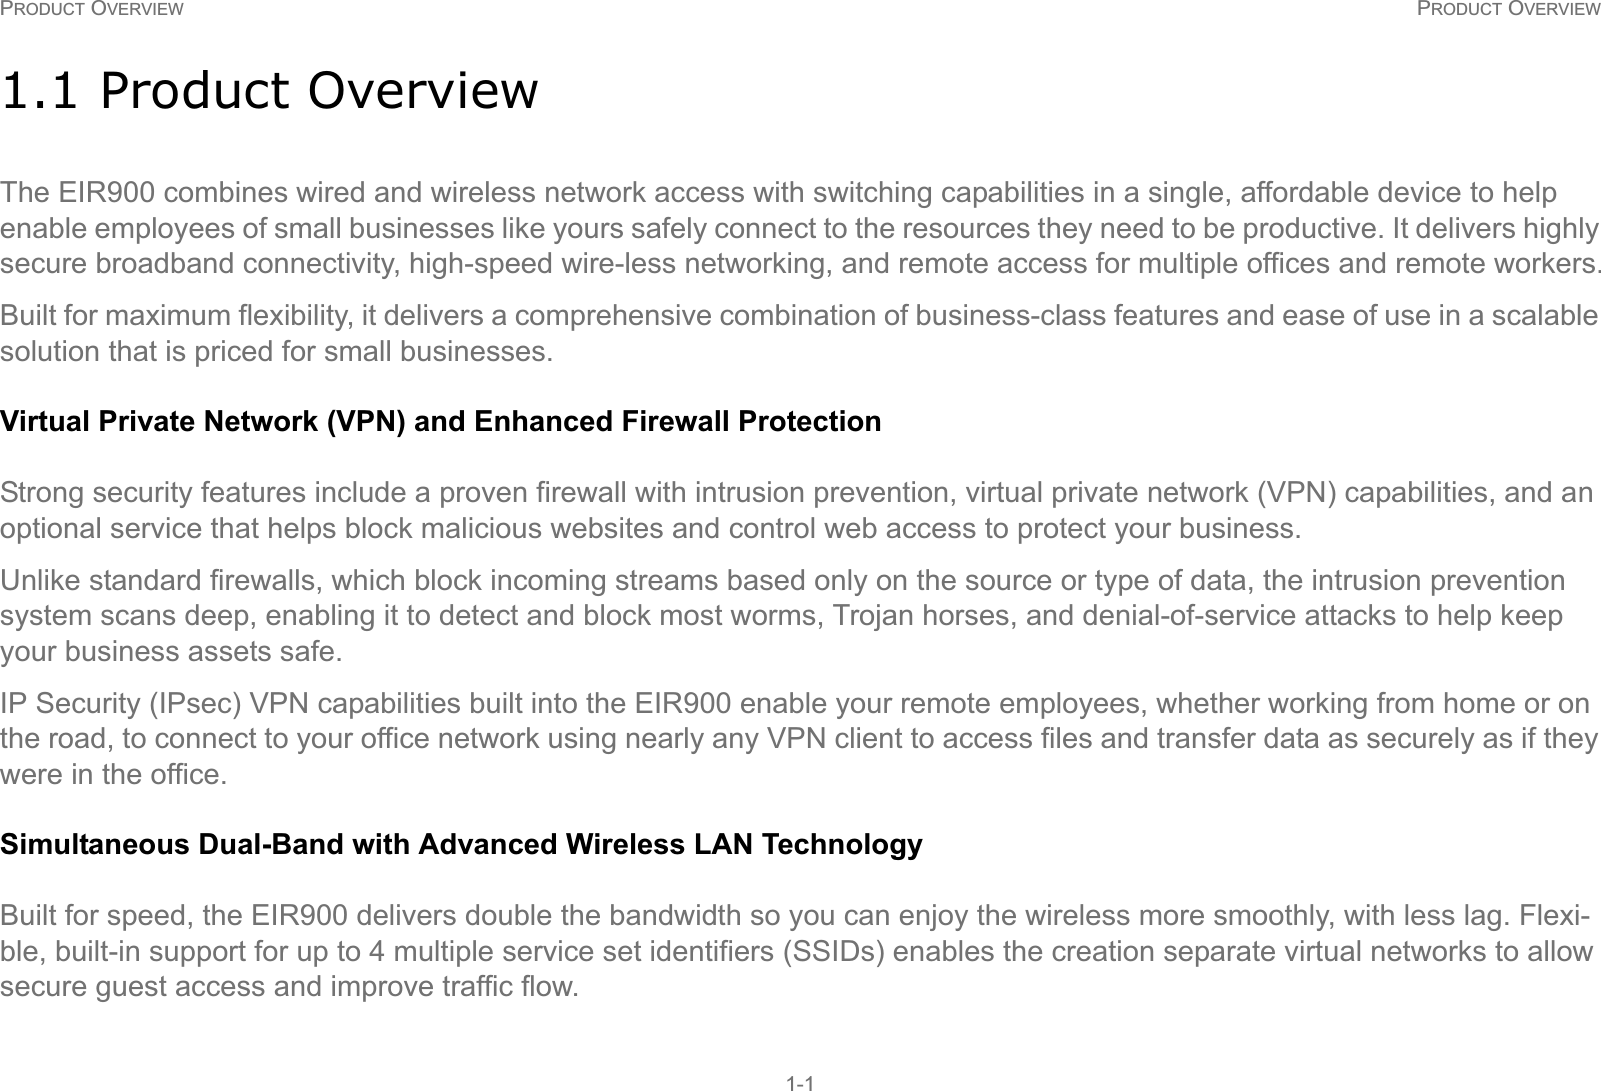 PRODUCT OVERVIEW PRODUCT OVERVIEW1-11.1 Product OverviewThe EIR900 combines wired and wireless network access with switching capabilities in a single, affordable device to help enable employees of small businesses like yours safely connect to the resources they need to be productive. It delivers highly secure broadband connectivity, high-speed wire-less networking, and remote access for multiple offices and remote workers.Built for maximum flexibility, it delivers a comprehensive combination of business-class features and ease of use in a scalable solution that is priced for small businesses.Virtual Private Network (VPN) and Enhanced Firewall ProtectionStrong security features include a proven firewall with intrusion prevention, virtual private network (VPN) capabilities, and an optional service that helps block malicious websites and control web access to protect your business.Unlike standard firewalls, which block incoming streams based only on the source or type of data, the intrusion prevention system scans deep, enabling it to detect and block most worms, Trojan horses, and denial-of-service attacks to help keep your business assets safe.IP Security (IPsec) VPN capabilities built into the EIR900 enable your remote employees, whether working from home or on the road, to connect to your office network using nearly any VPN client to access files and transfer data as securely as if they were in the office.Simultaneous Dual-Band with Advanced Wireless LAN TechnologyBuilt for speed, the EIR900 delivers double the bandwidth so you can enjoy the wireless more smoothly, with less lag. Flexi-ble, built-in support for up to 4 multiple service set identifiers (SSIDs) enables the creation separate virtual networks to allow secure guest access and improve traffic flow.